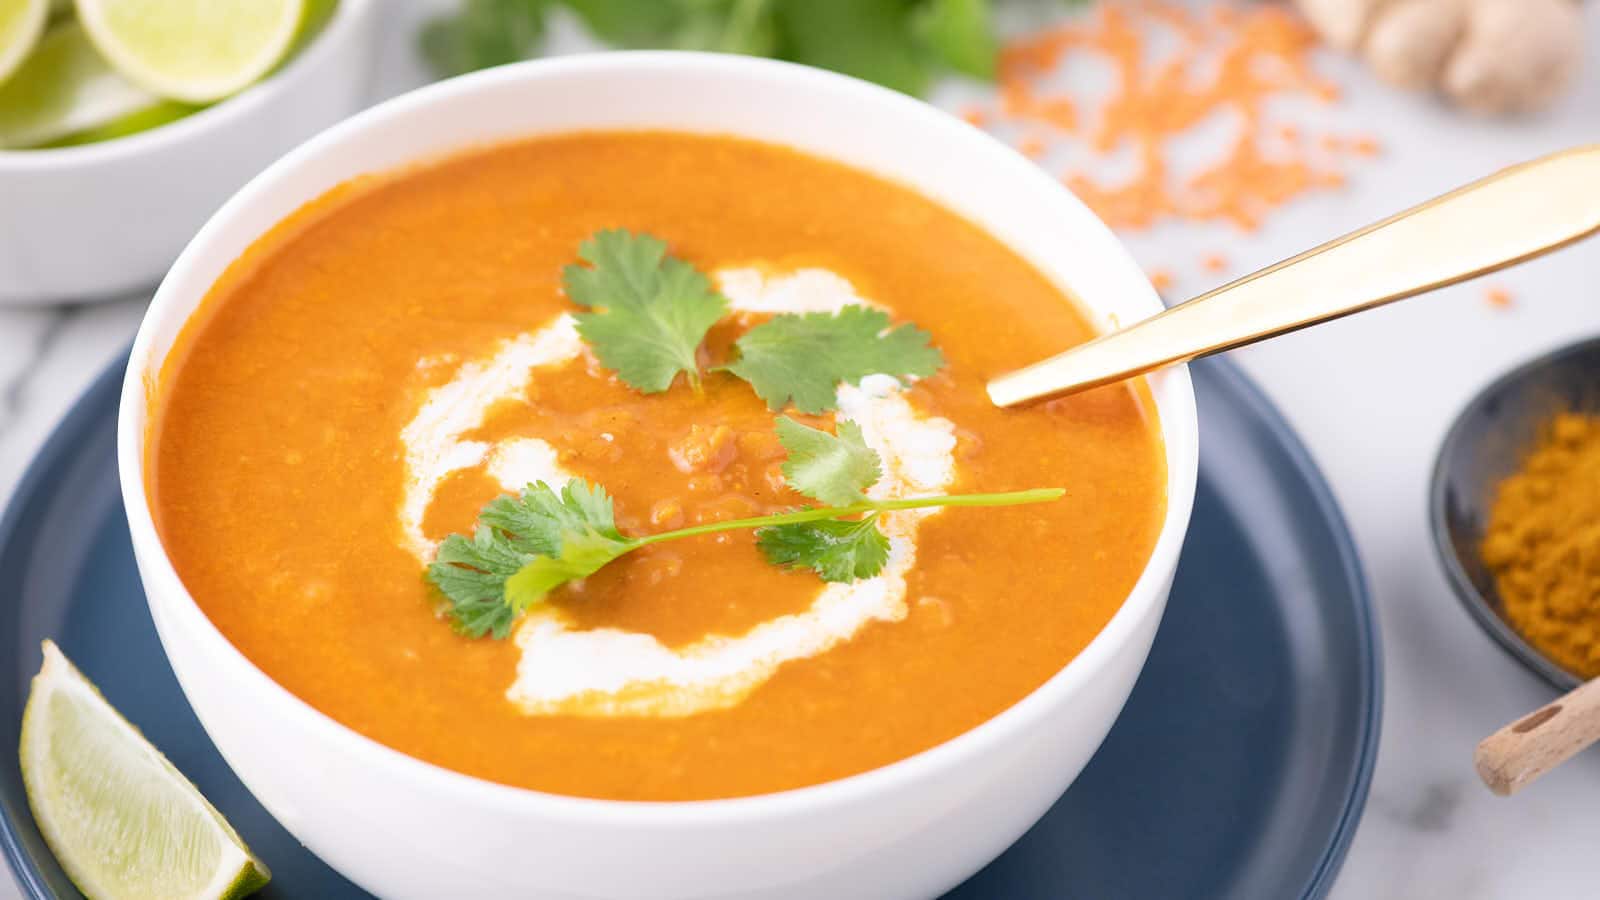 Lentil and Tomato Soup recipe by Cheerful Cook.